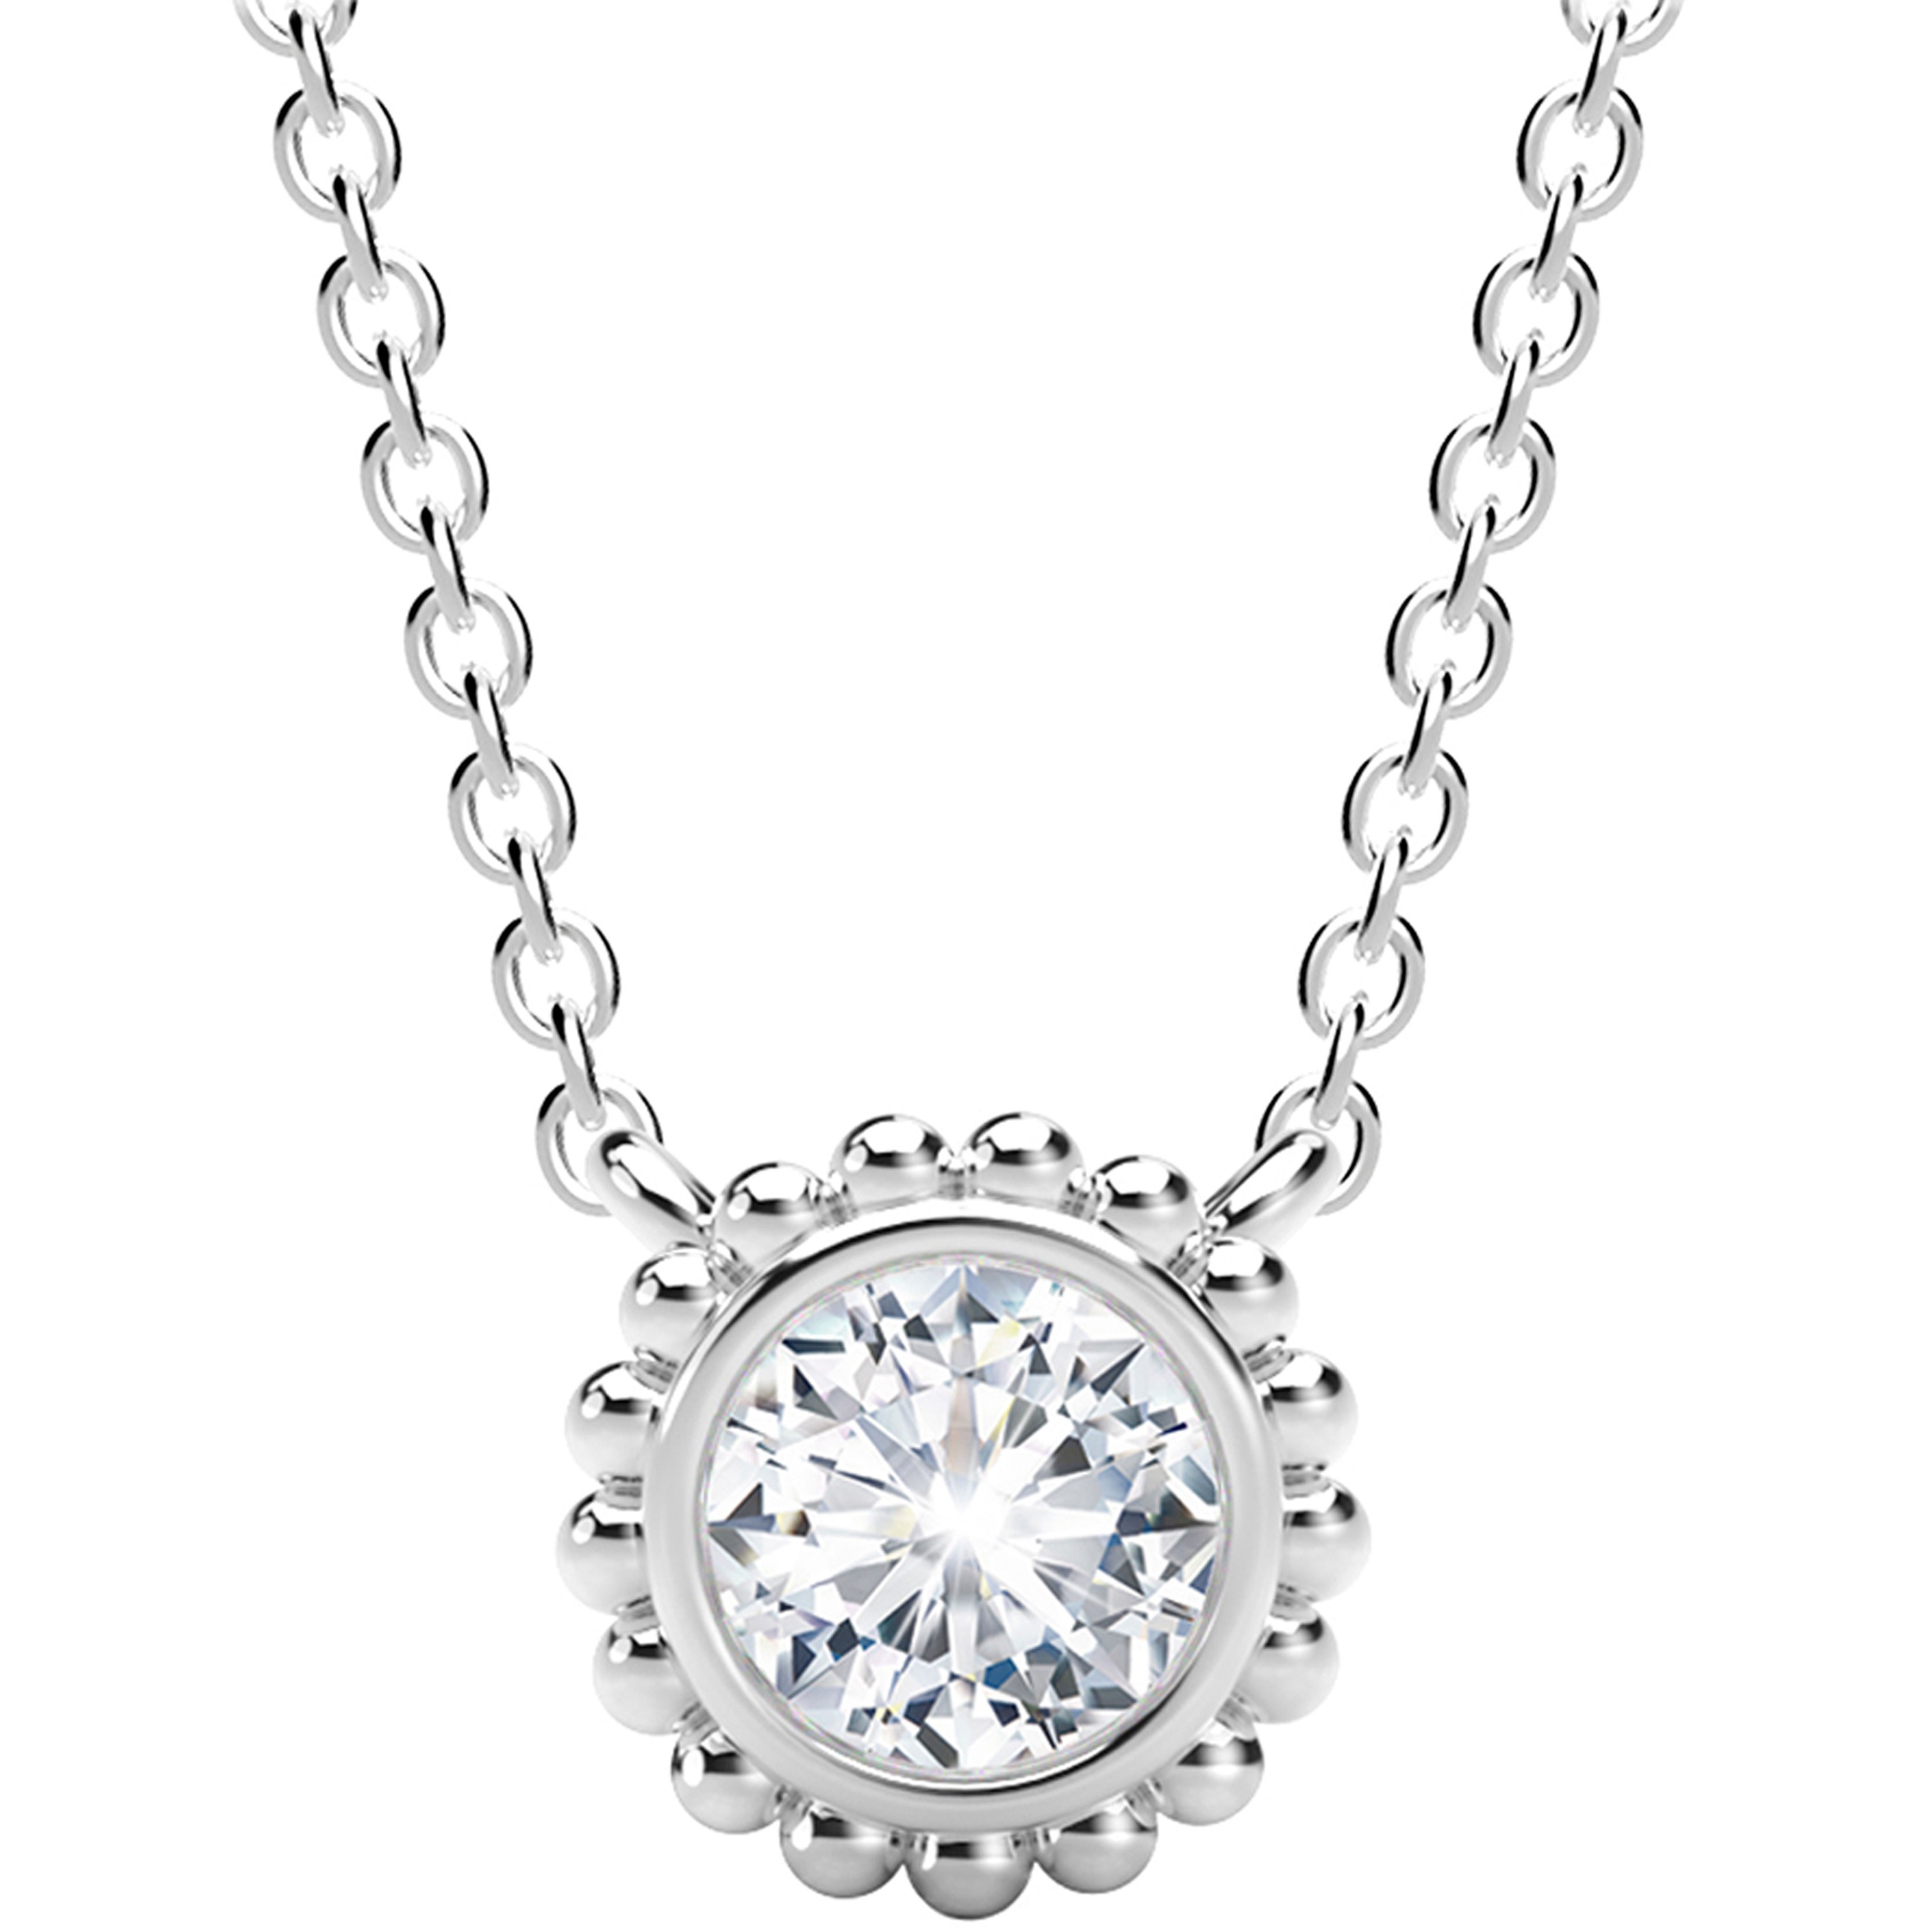 The Tribute Collection Round Beaded Pendant